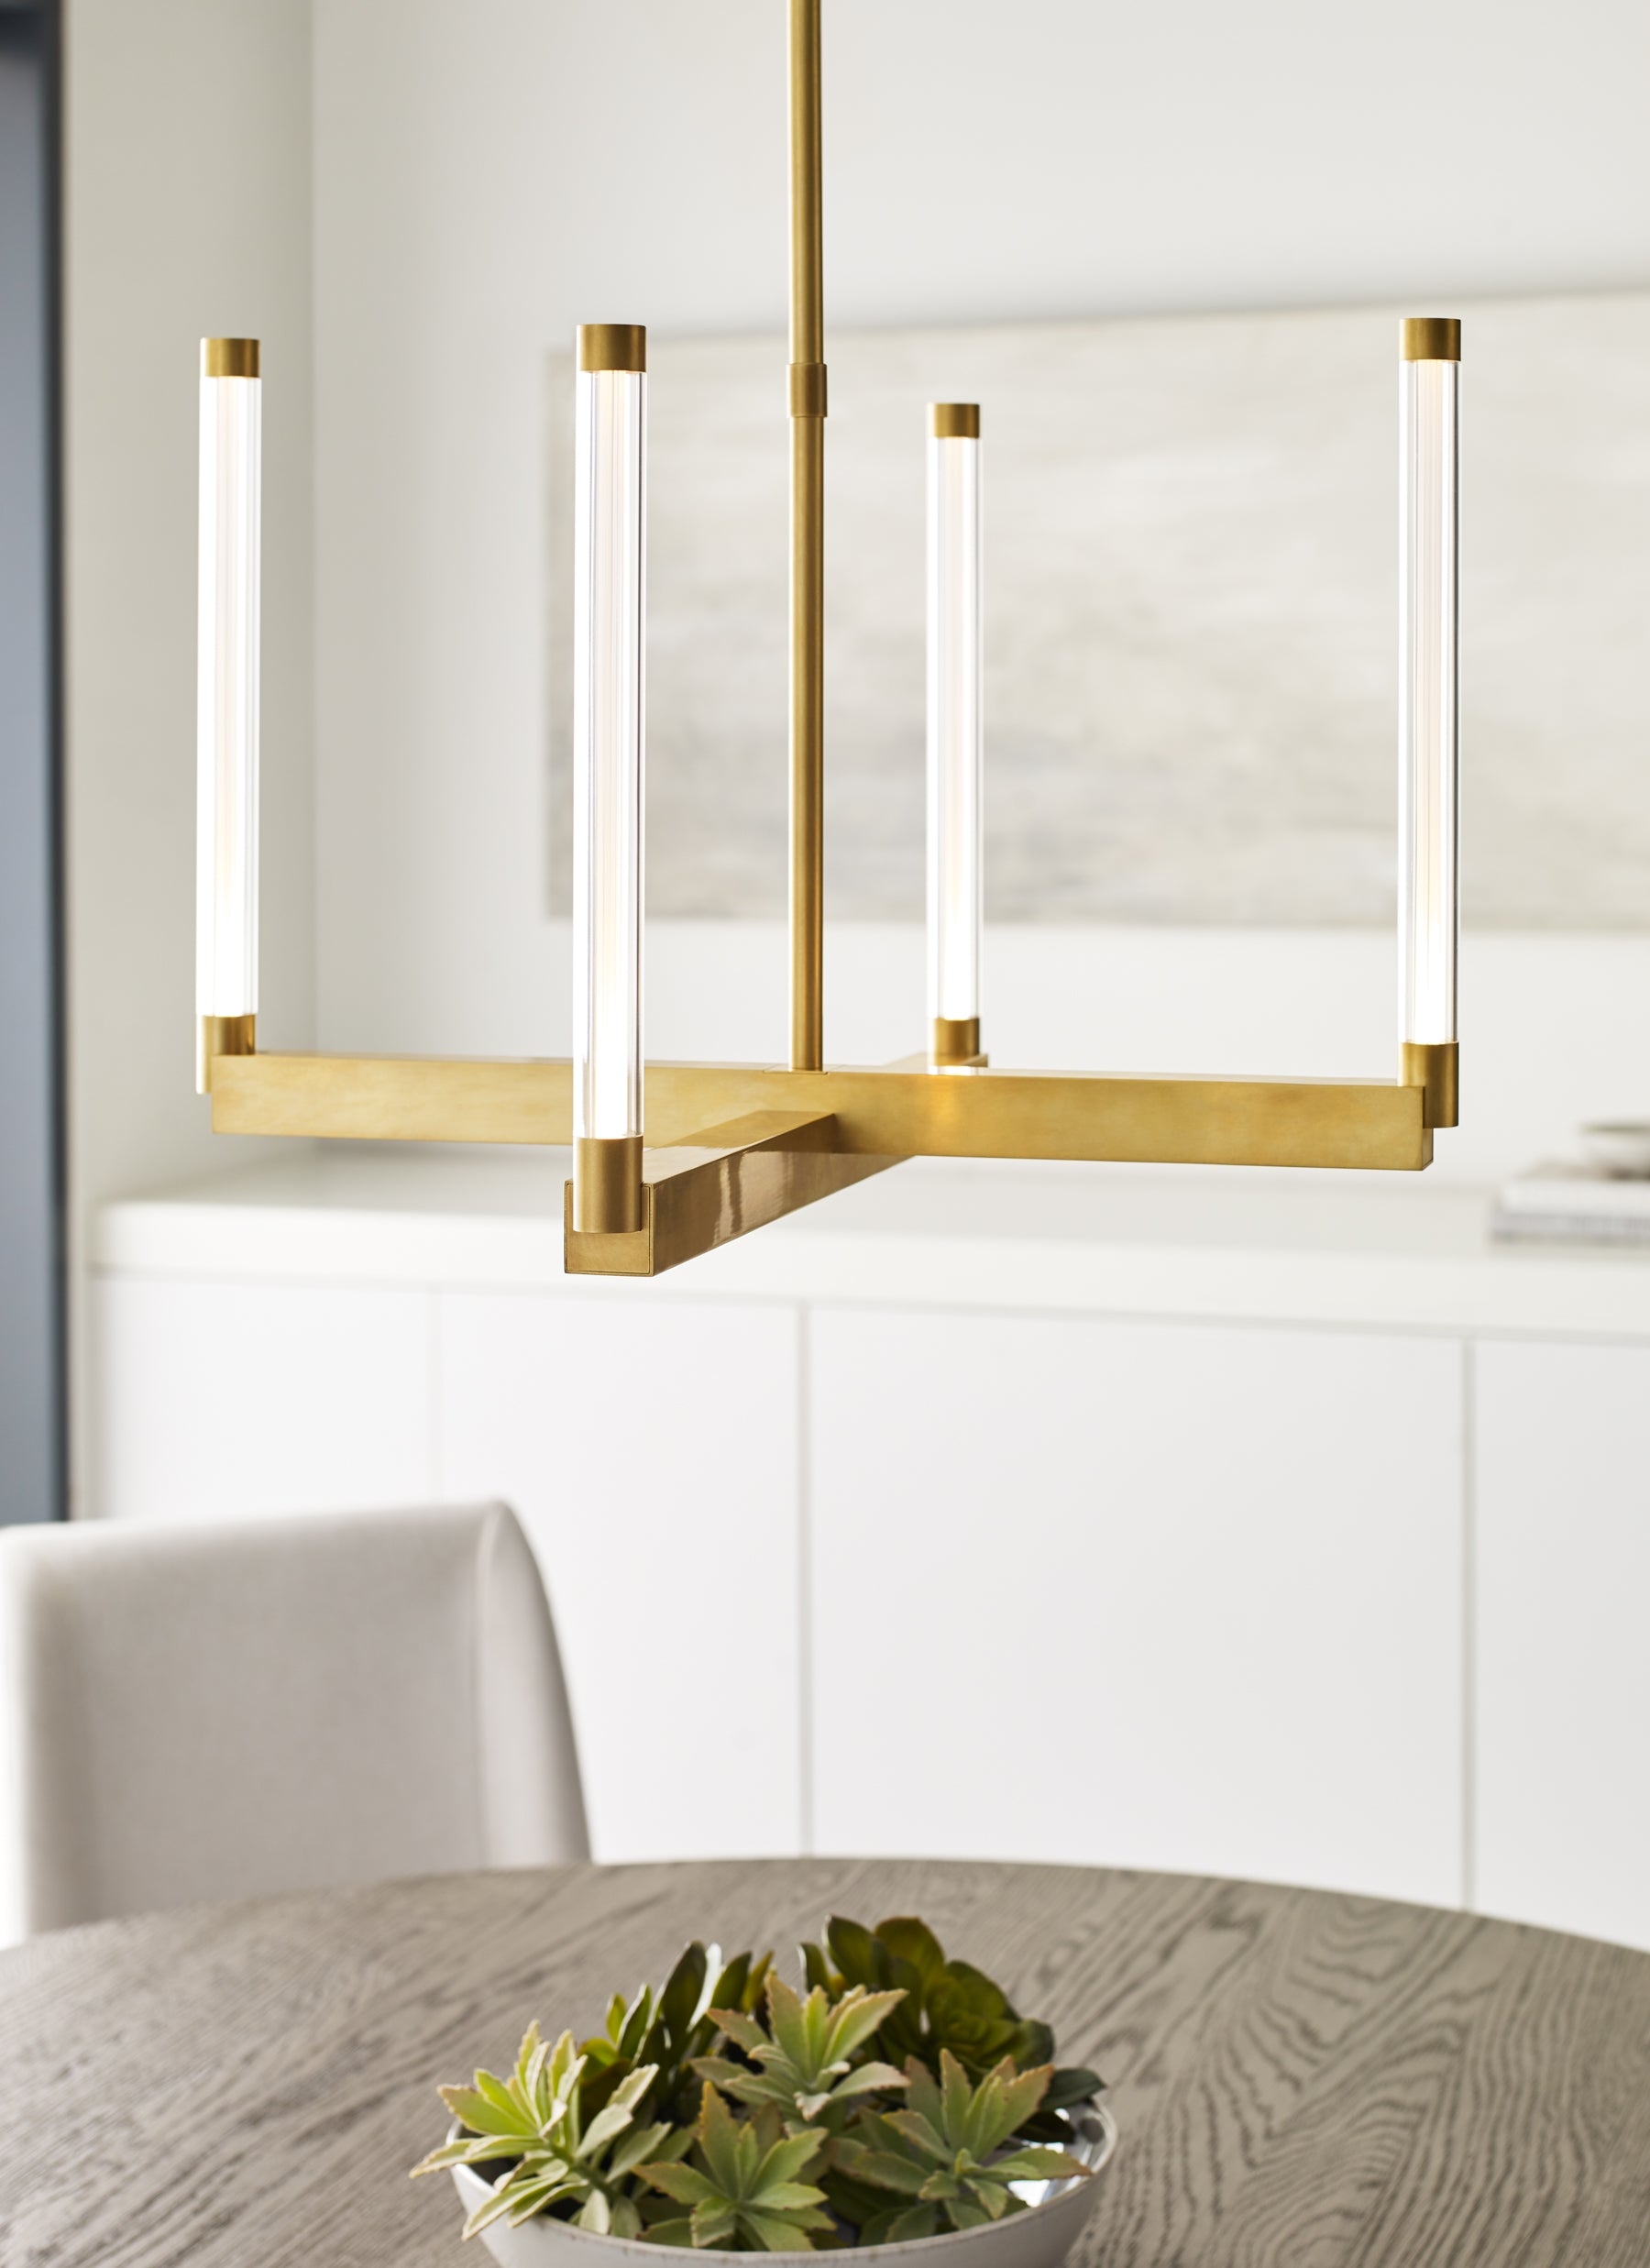 Sophisticated Room Decor Featuring Stylish Lighting